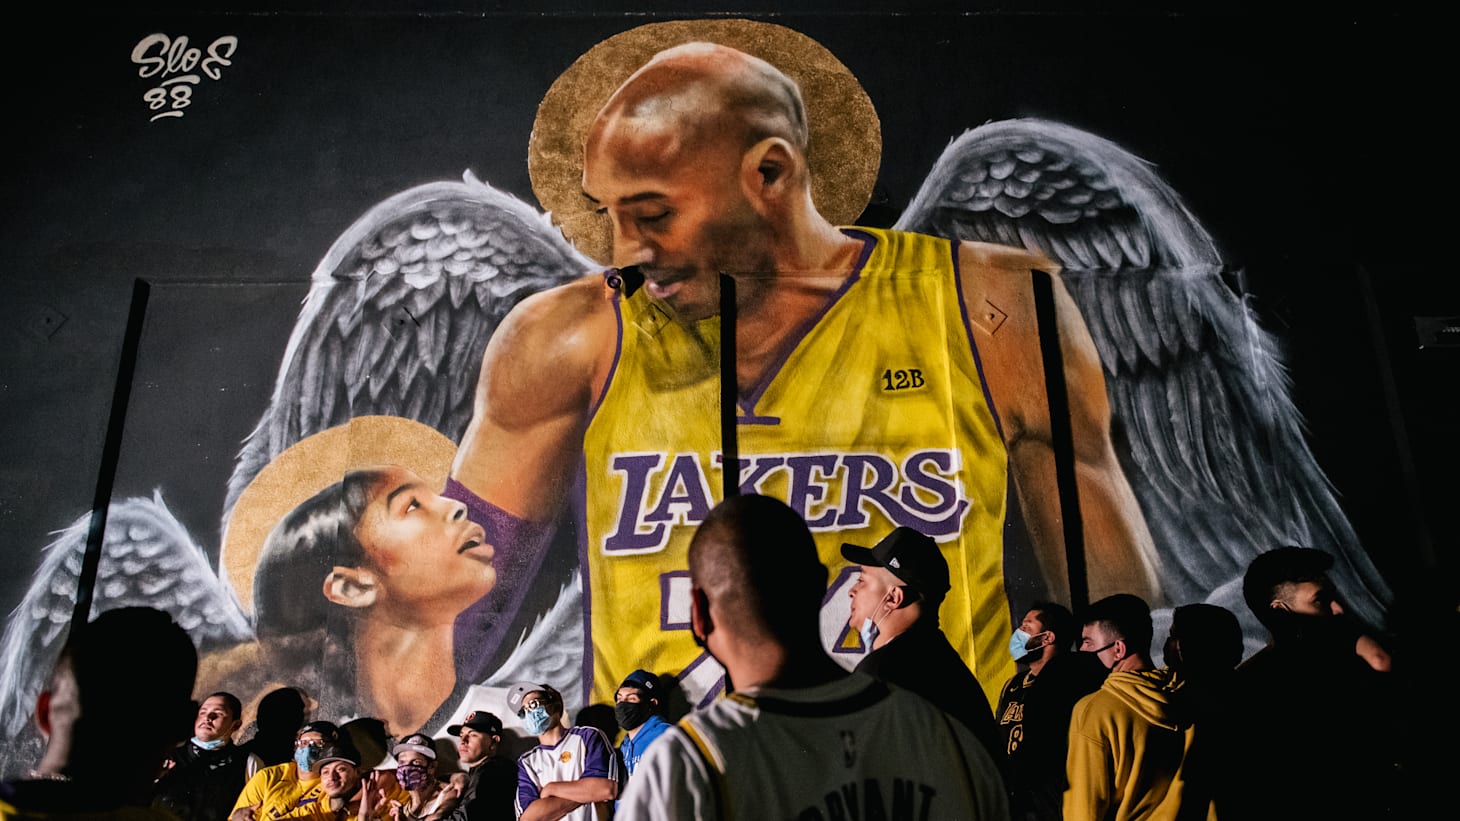 Kobe Bryant's Death, One Year Later: His Entertainment Industry Legacy